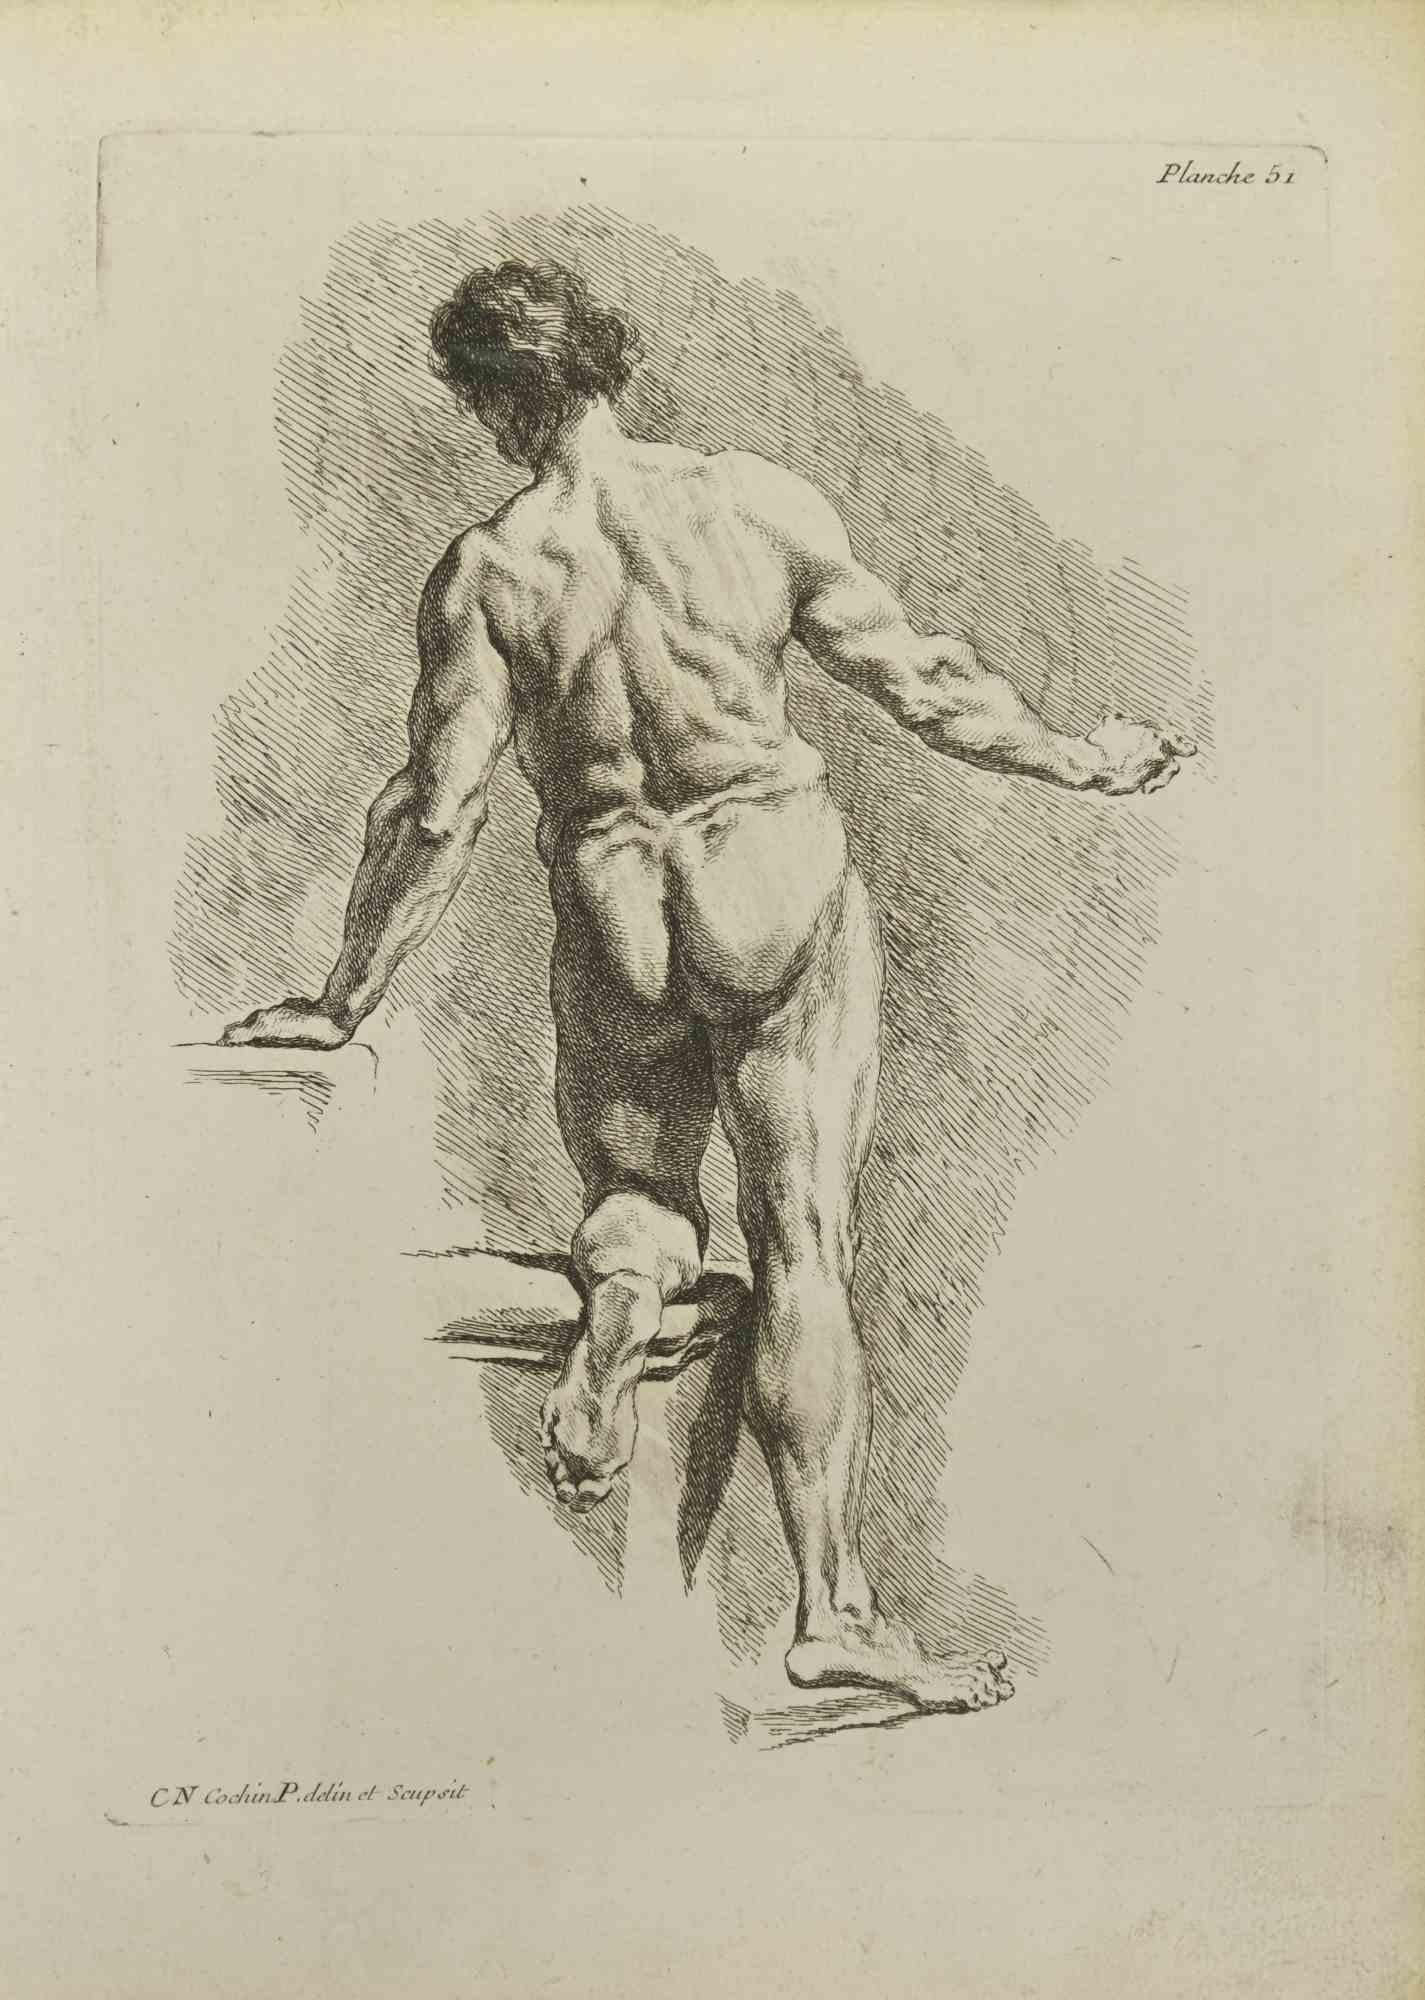 Anatomy Studies is an etching realized by Nicholas Cochin in 1755.

Good conditions with slight foxing.

Signed in the plate.

The artwork is depicted through confident strokes.

The etching was realized for the anatomy study “JOMBERT,